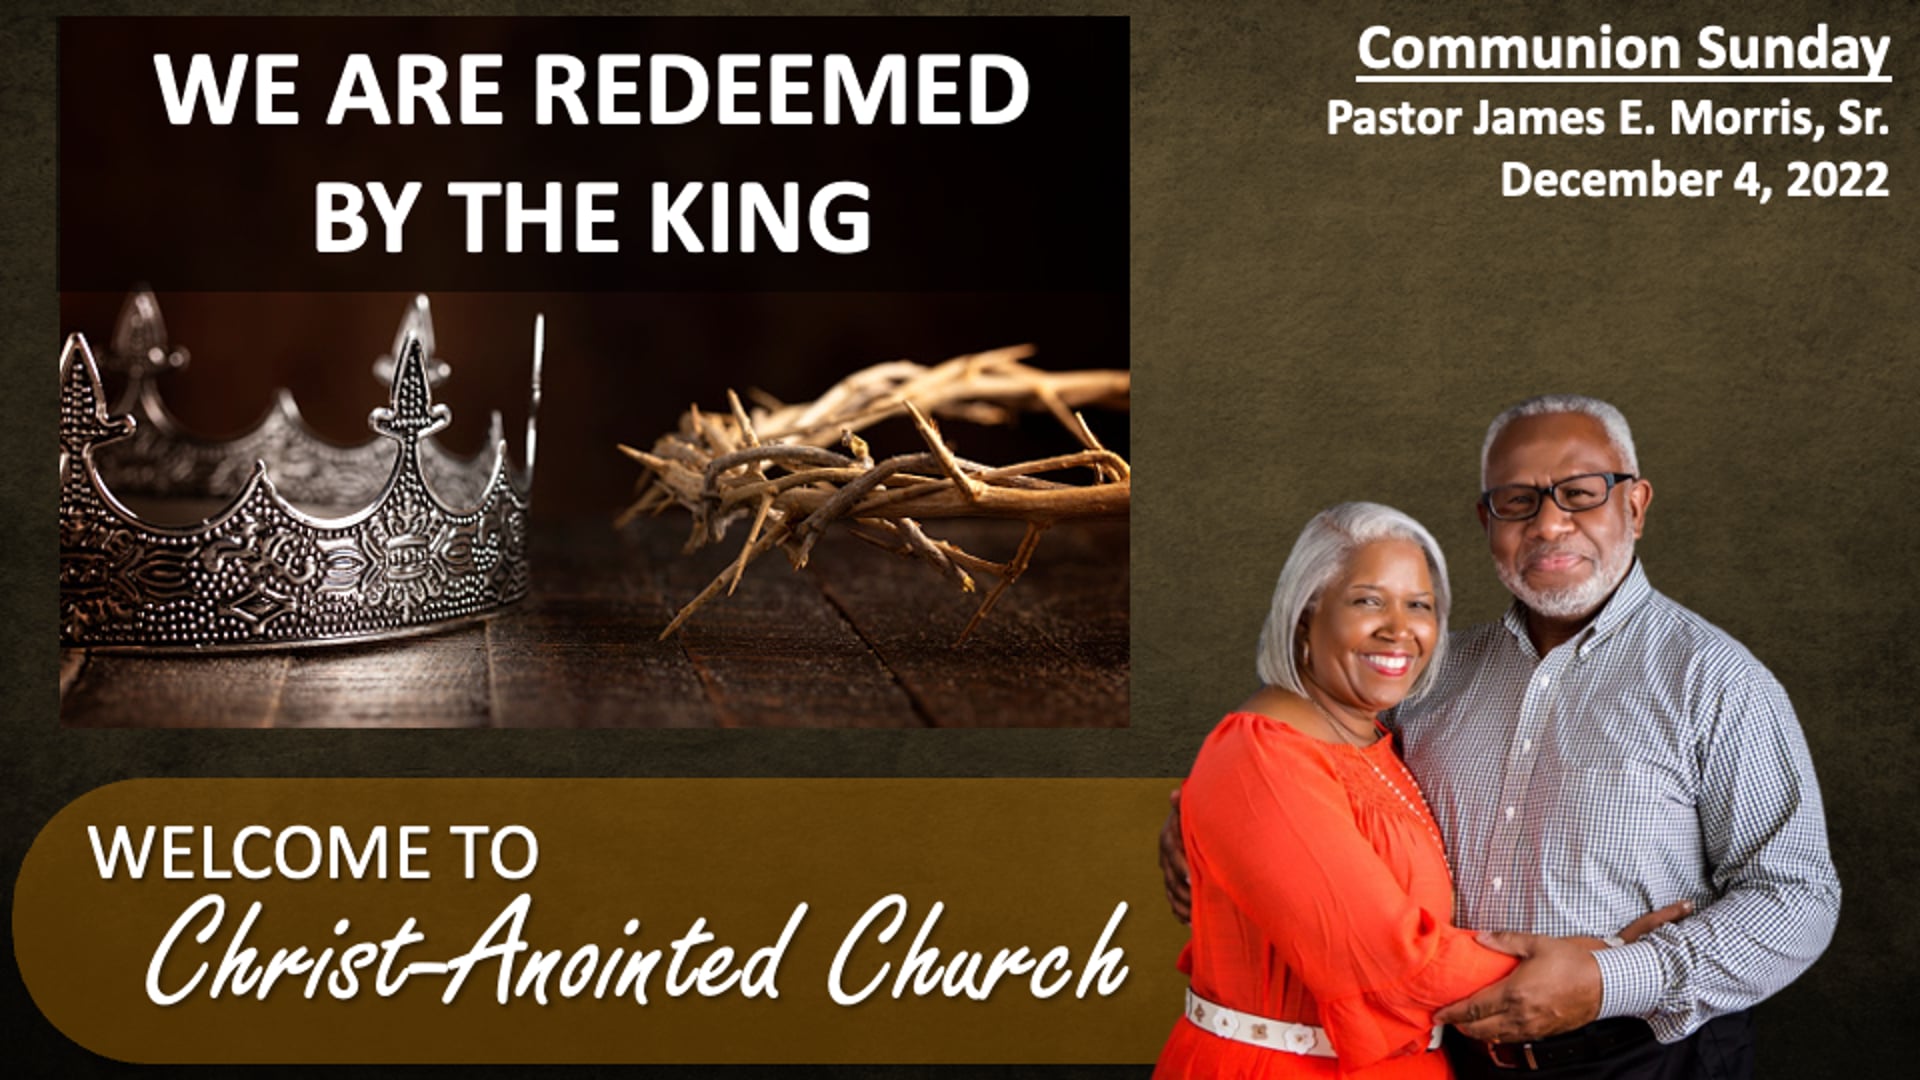 4 DEC 22 - Redeemed by the King - SD 480p